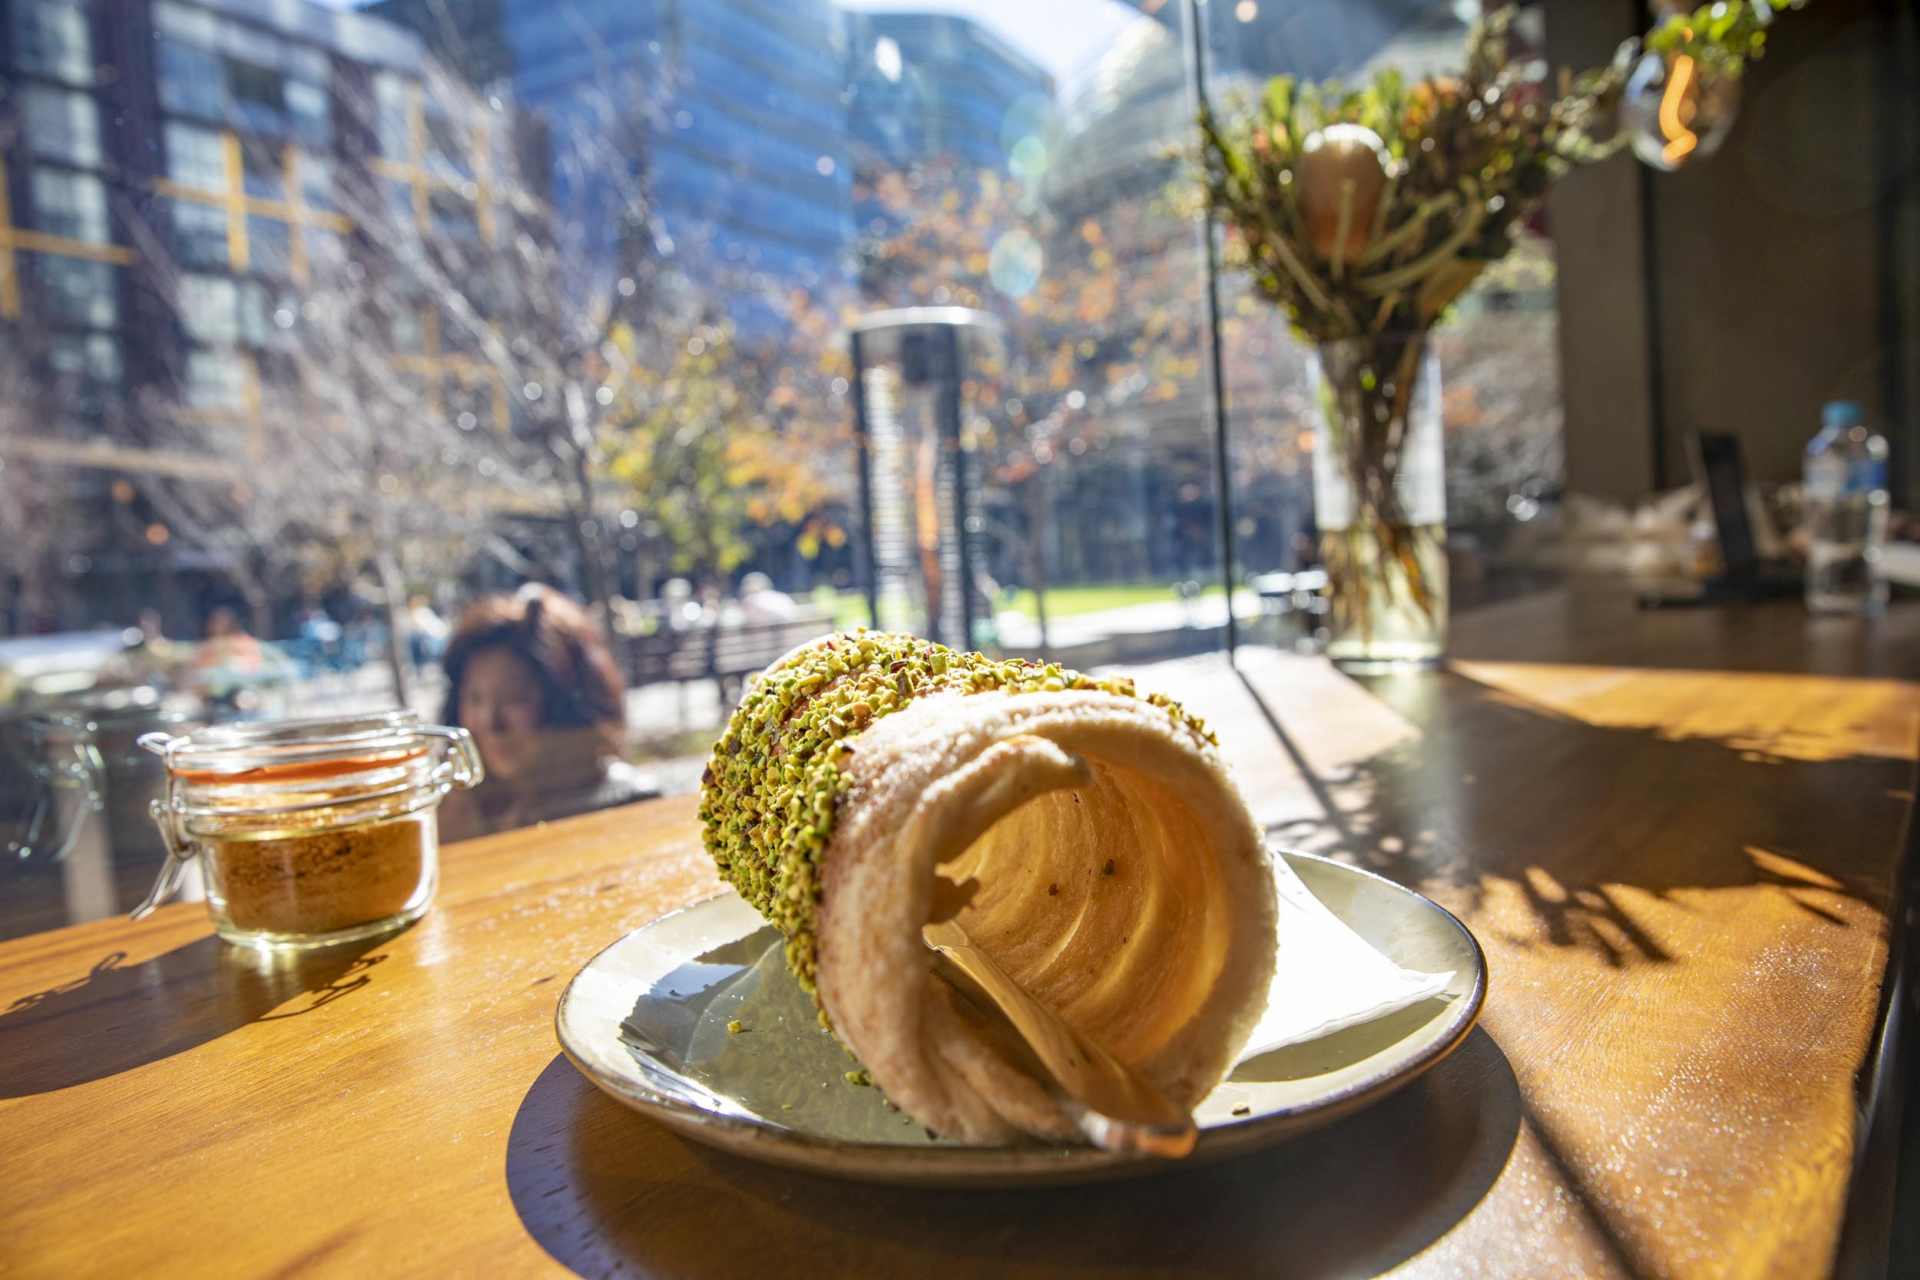 8 of the most delicious desserts at restaurants in Darling Harbour